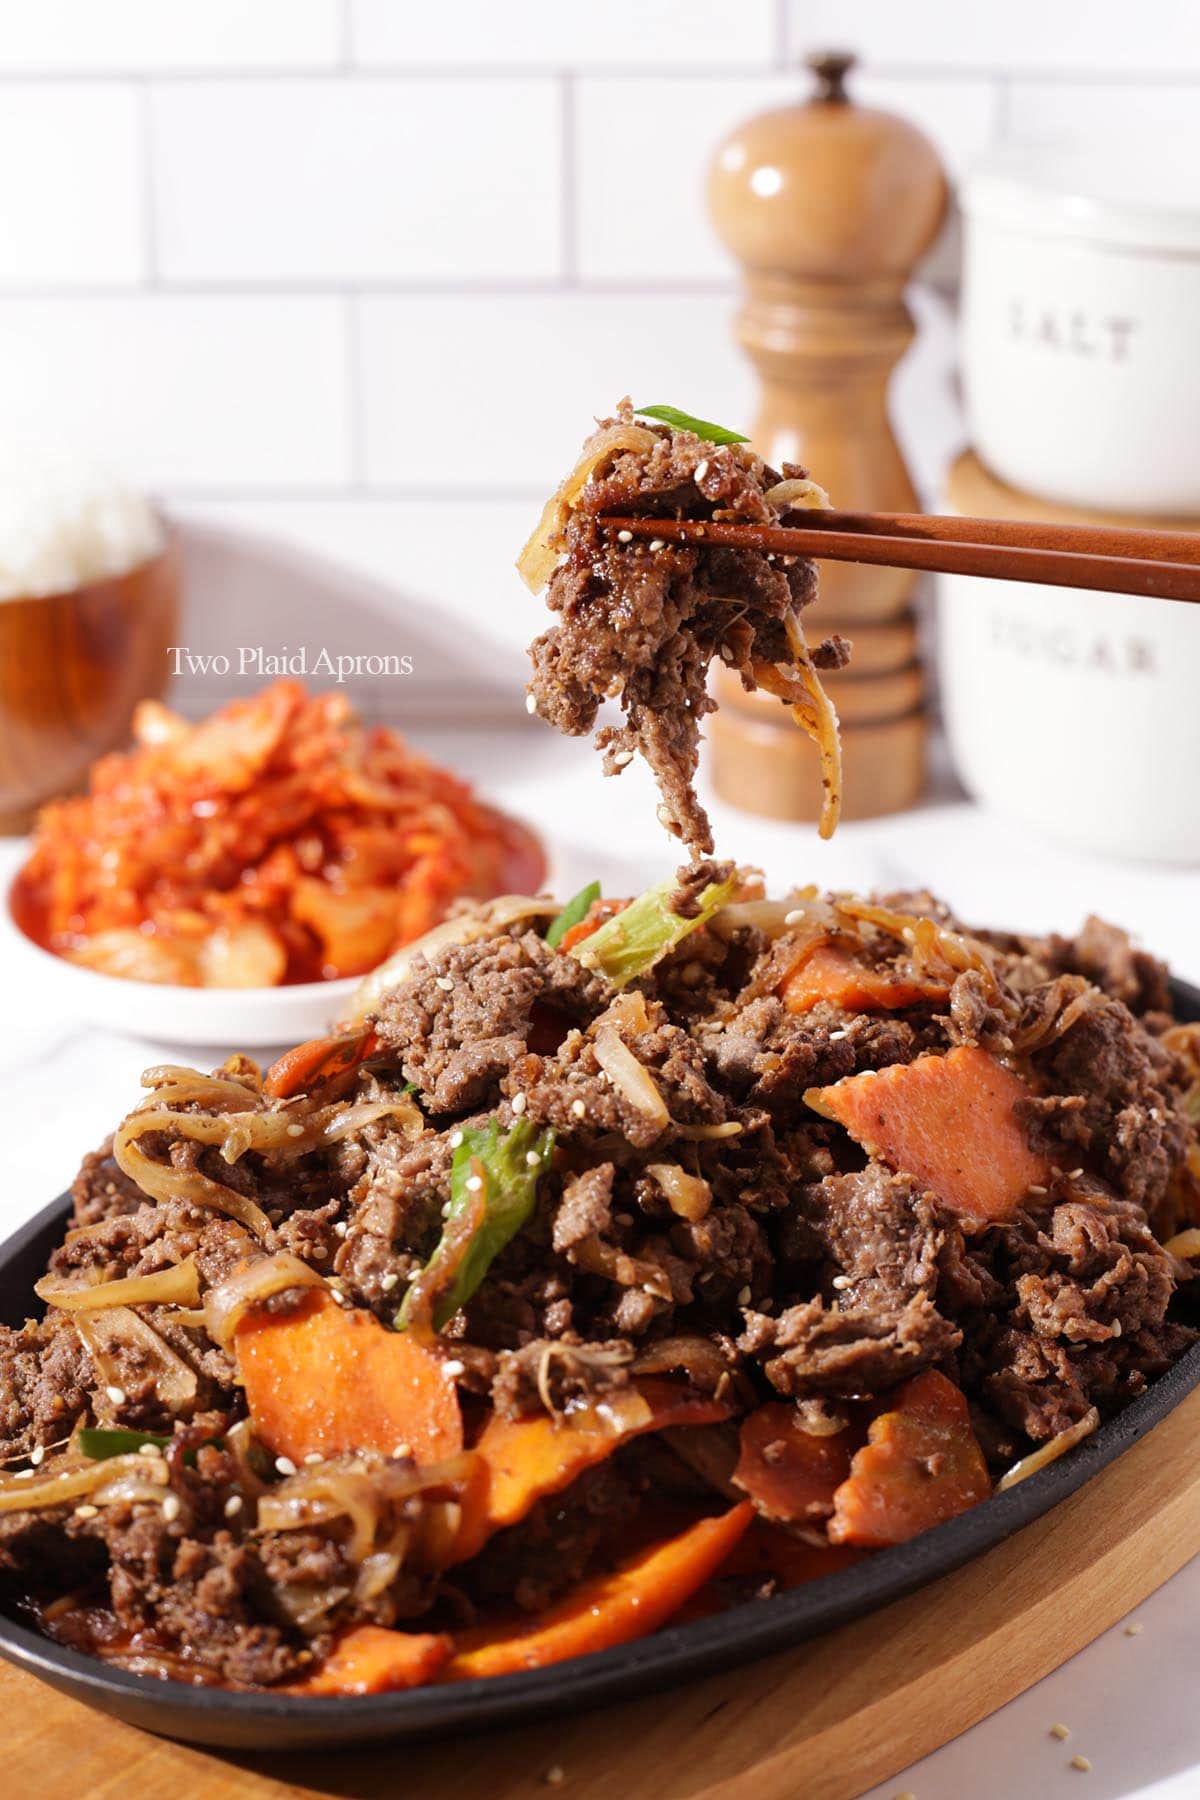 Korean beef bulgogi with vegetables and served on a cast iron plate.